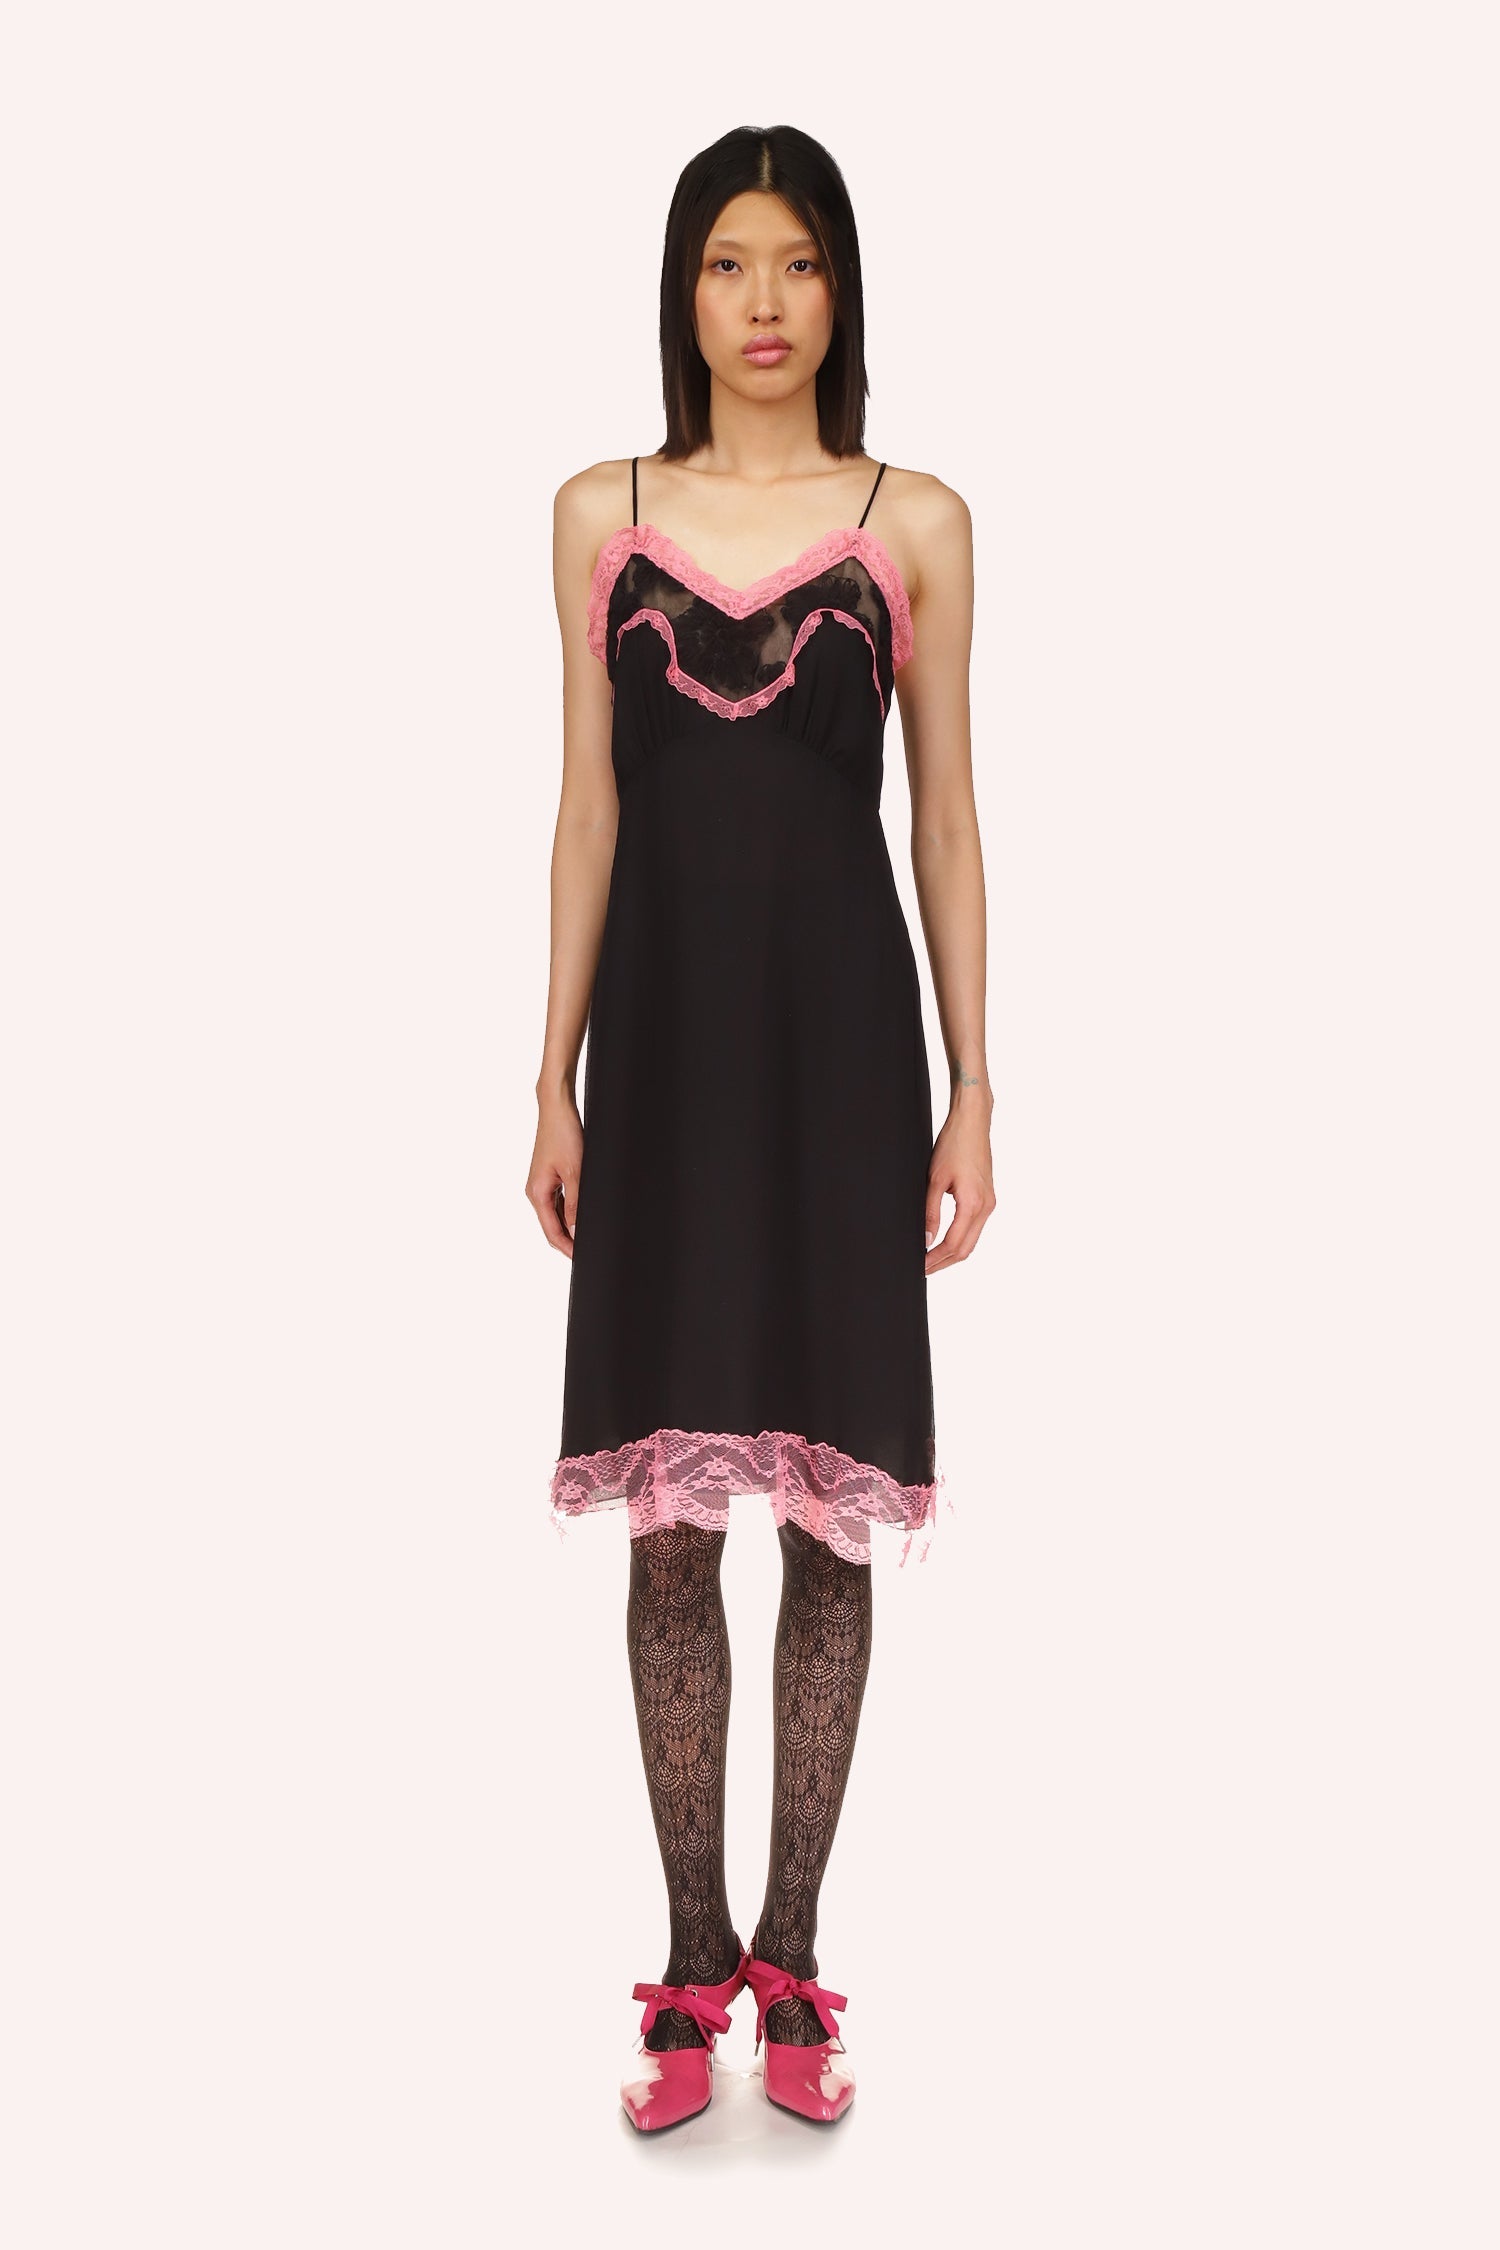 Black dress, pink rim provides pop of color, a black floral see-through between the pink, sleeveless, 2 straps, knee-long